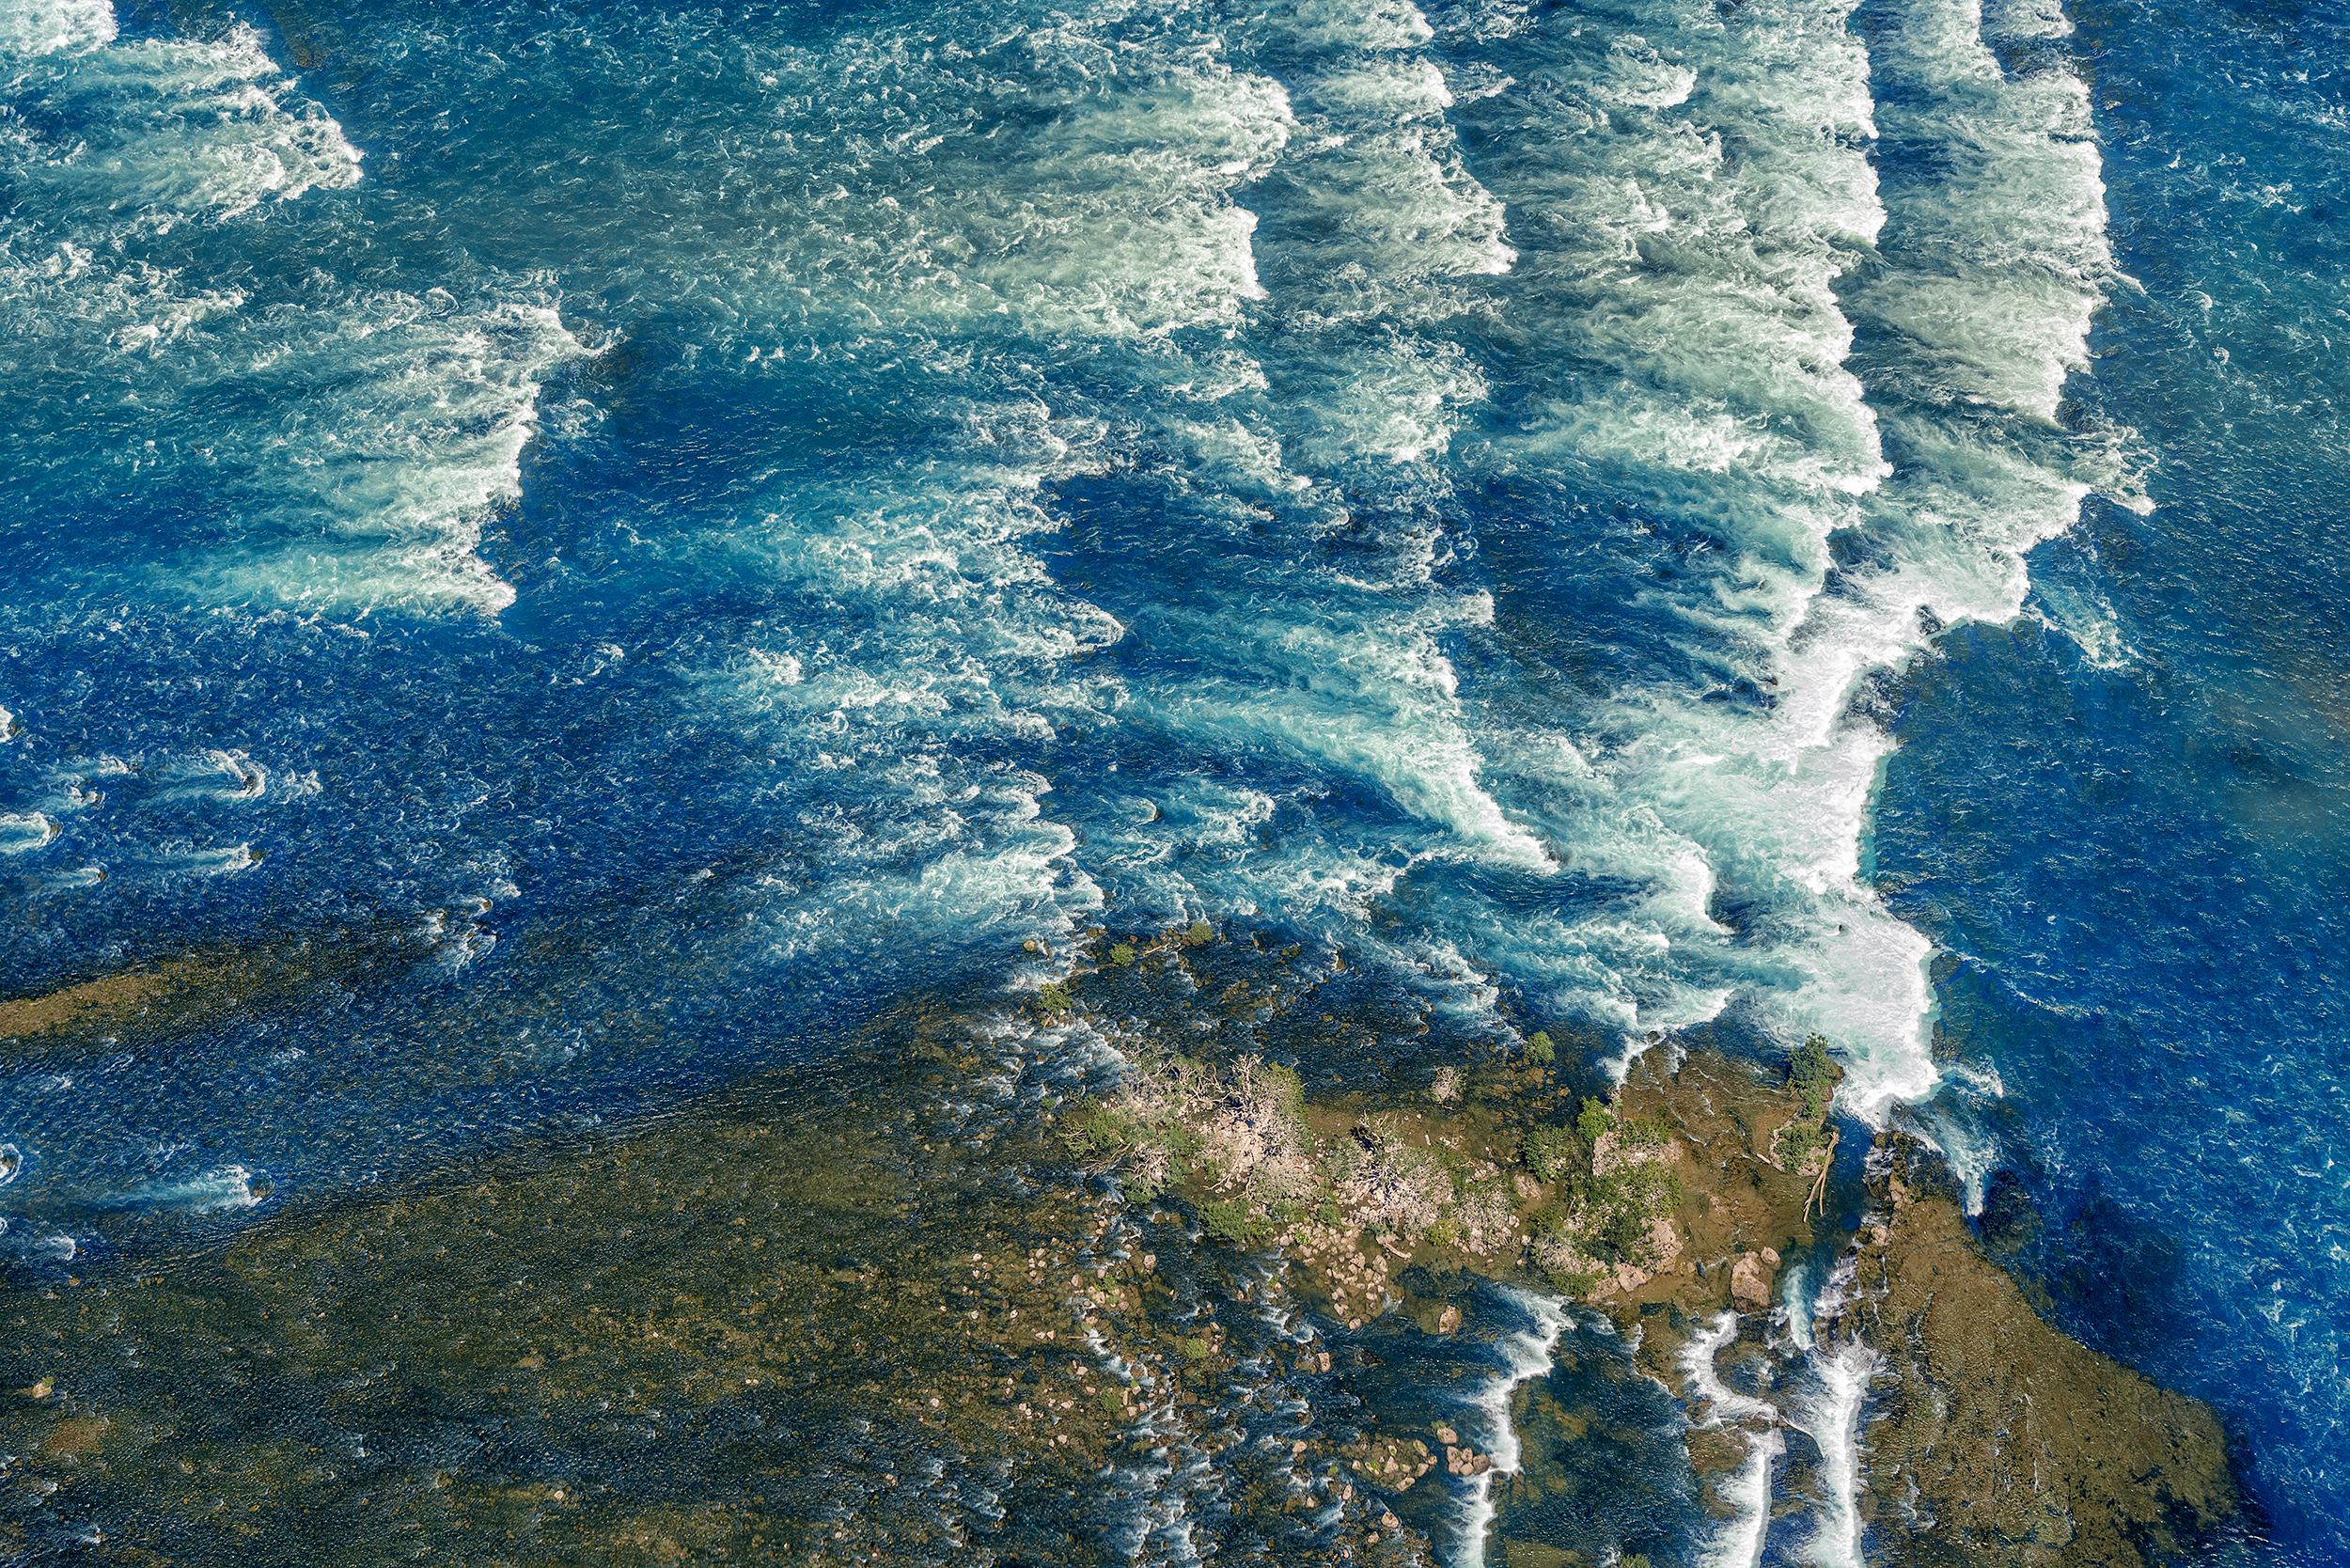 Zoe Wetherall Abstract Photograph - "Niagara" Contemporary Abstract Color Landscape Photograph, limited edition